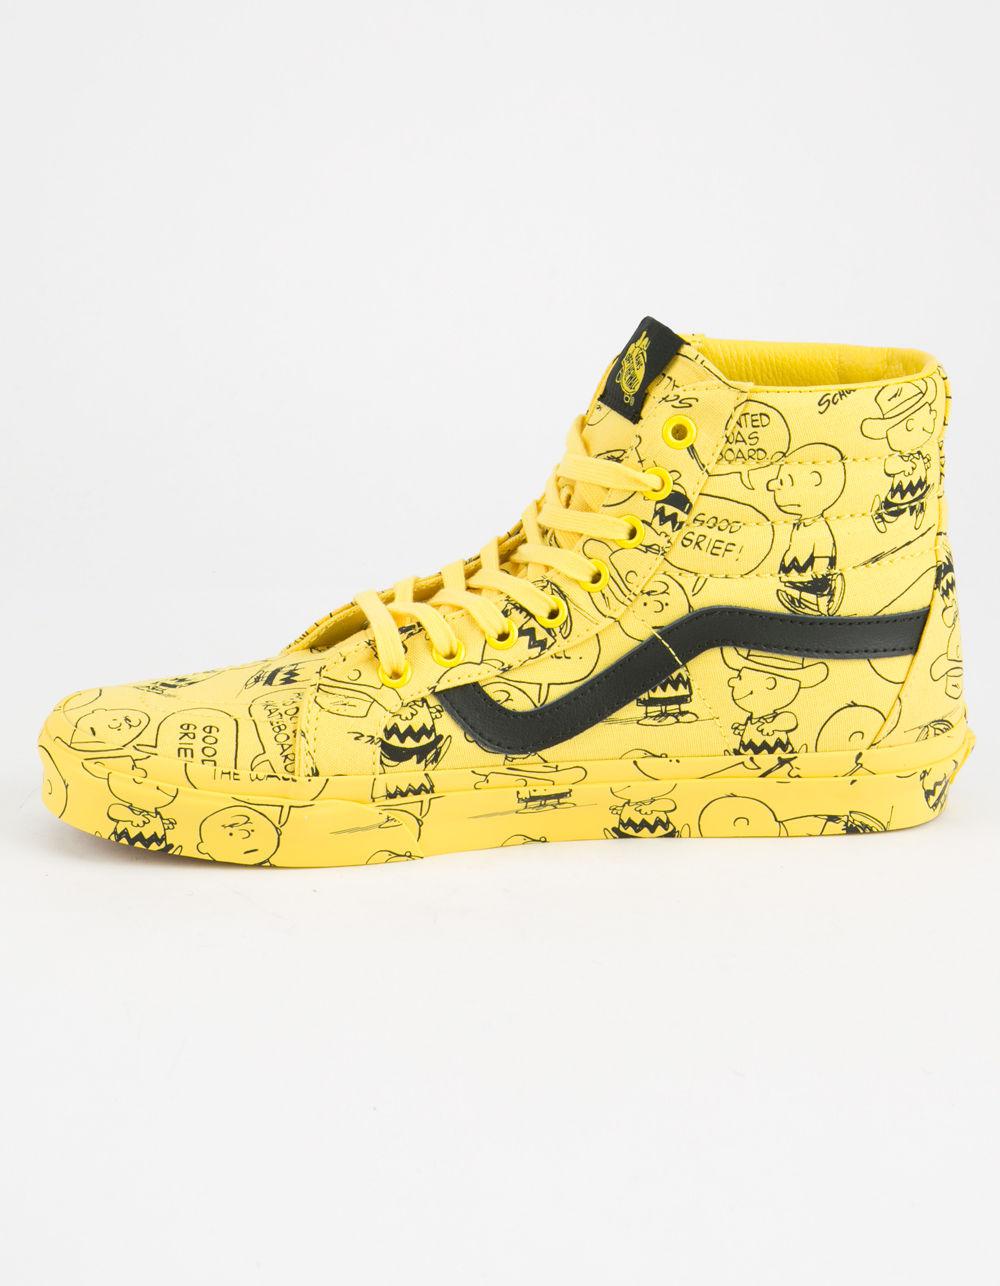 Vans Canvas X Peanuts Charlie Brown Sk8-hi Reissue Shoes in Yellow - Lyst